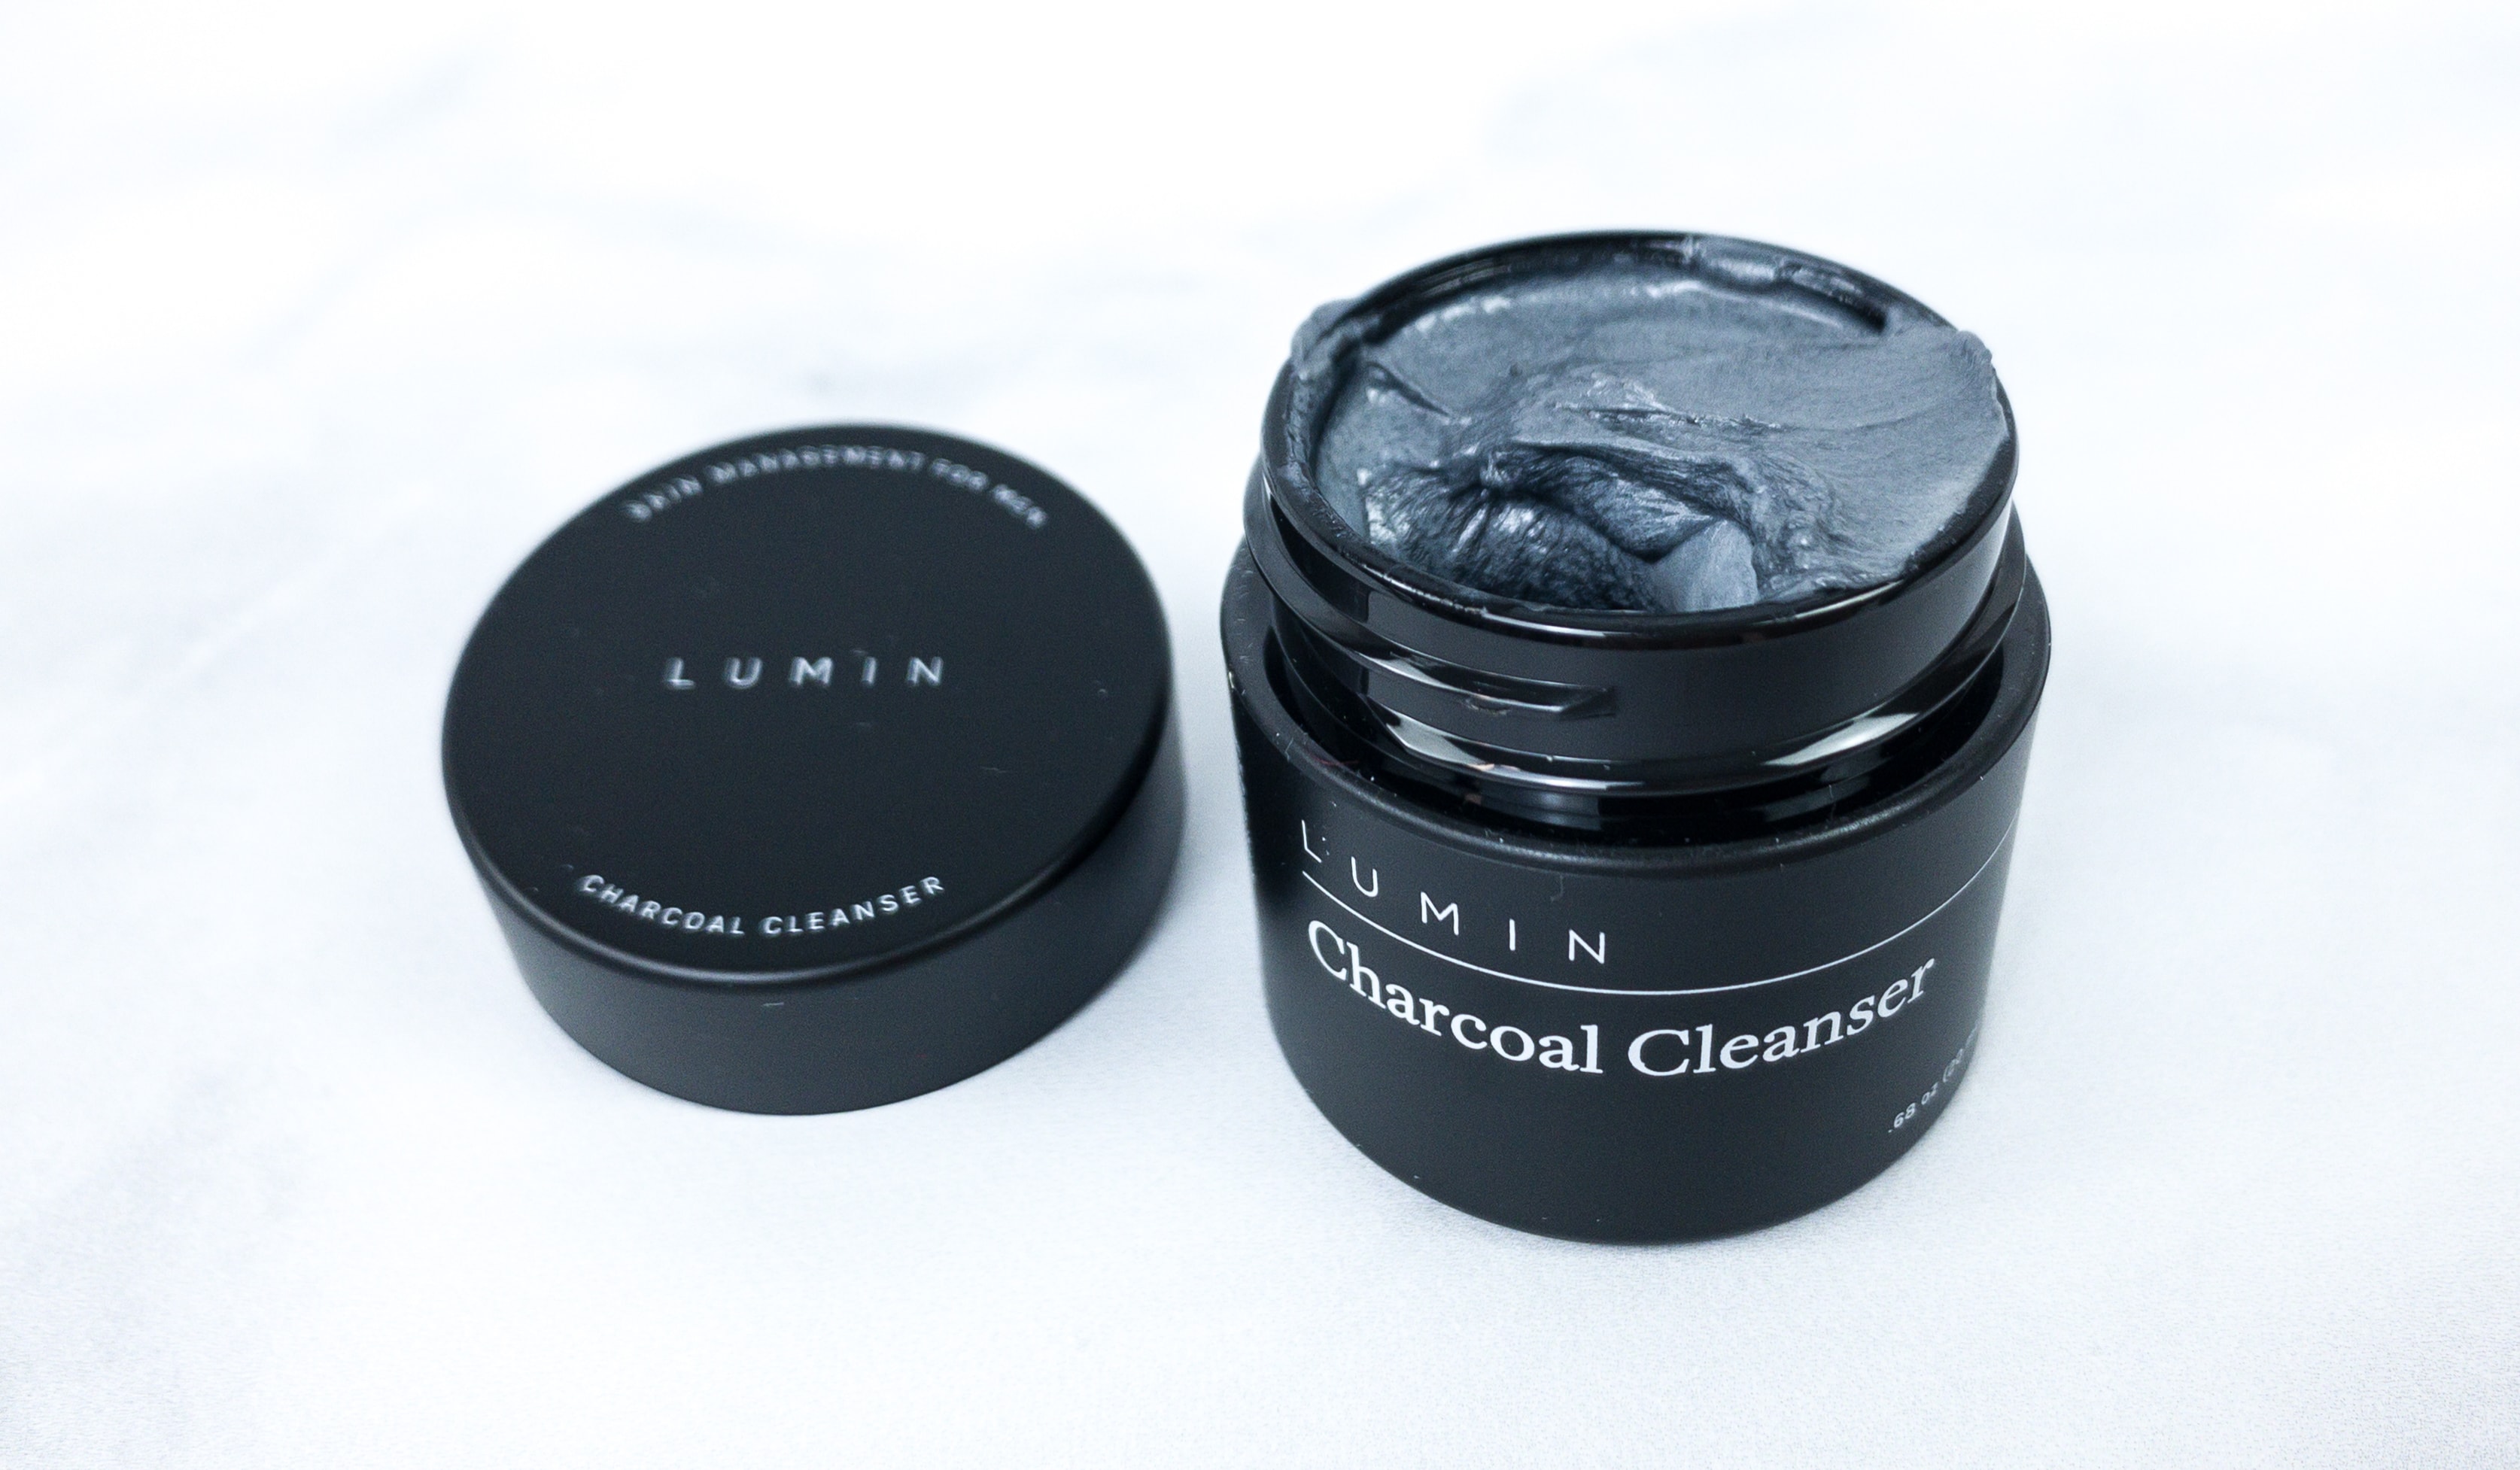 lumin charcoal cleanser